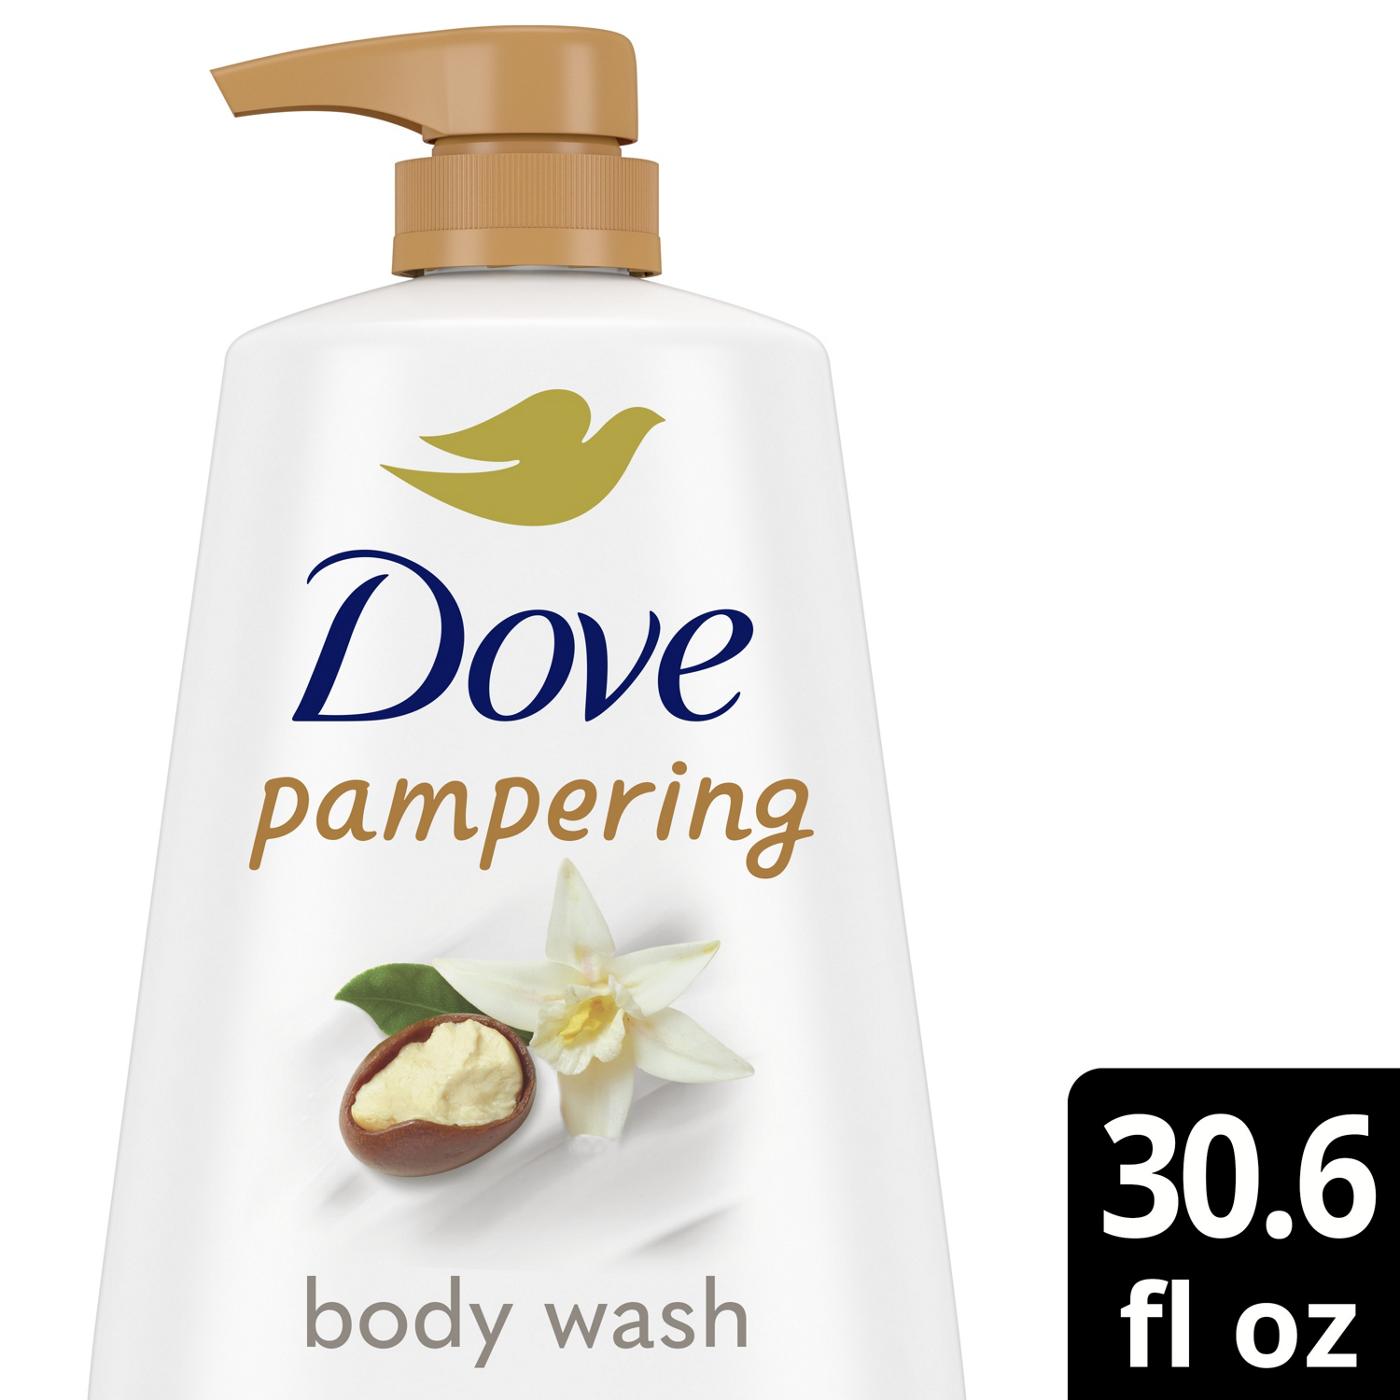 Dove Pampering Body Wash with Pump - Shea Butter & Vanilla ; image 2 of 9